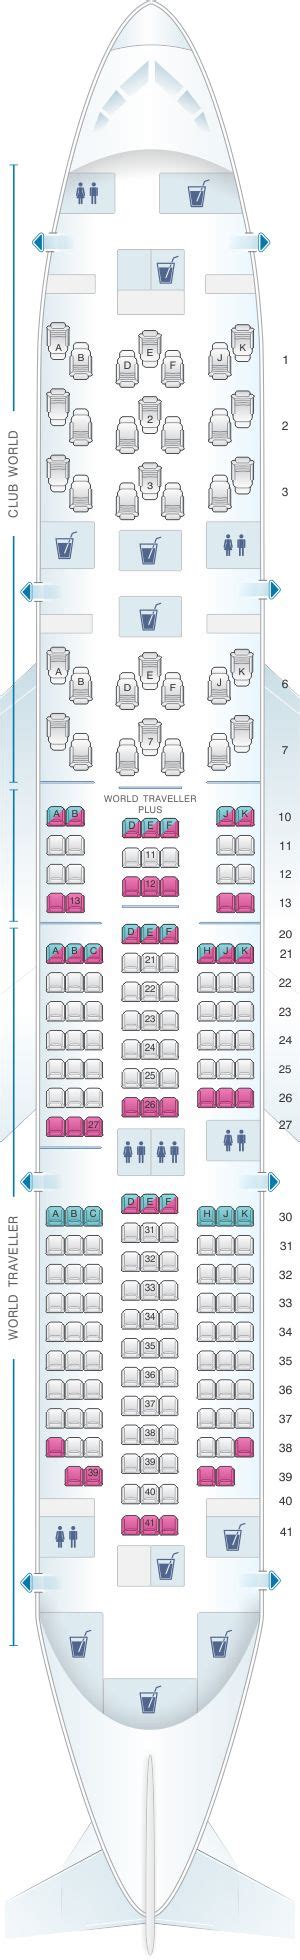 An Airplanes Seating Plan Is Shown In Blue And White